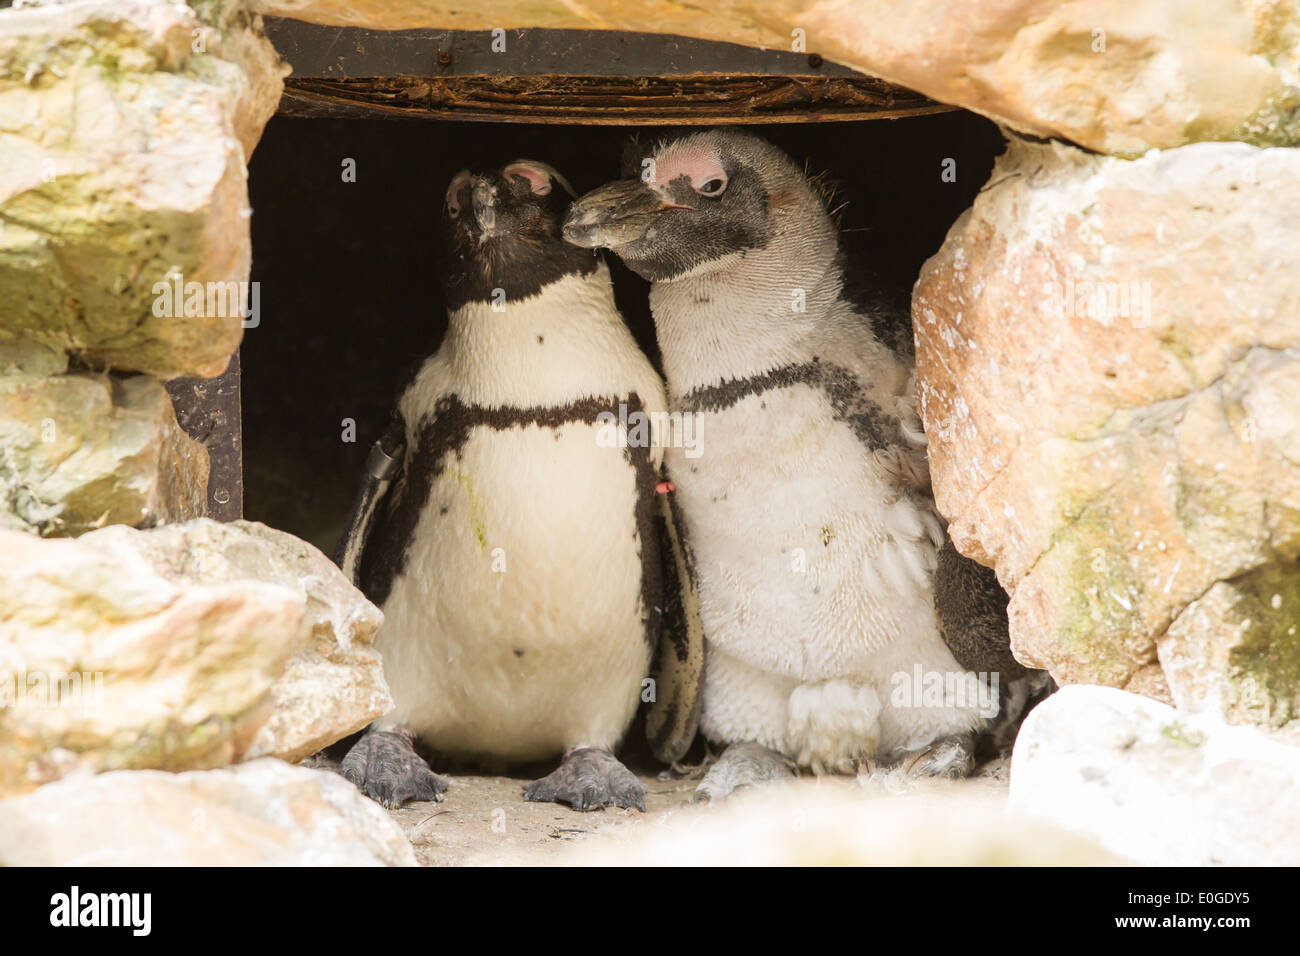 African penguins in it's nest in a zoo Stock Photo